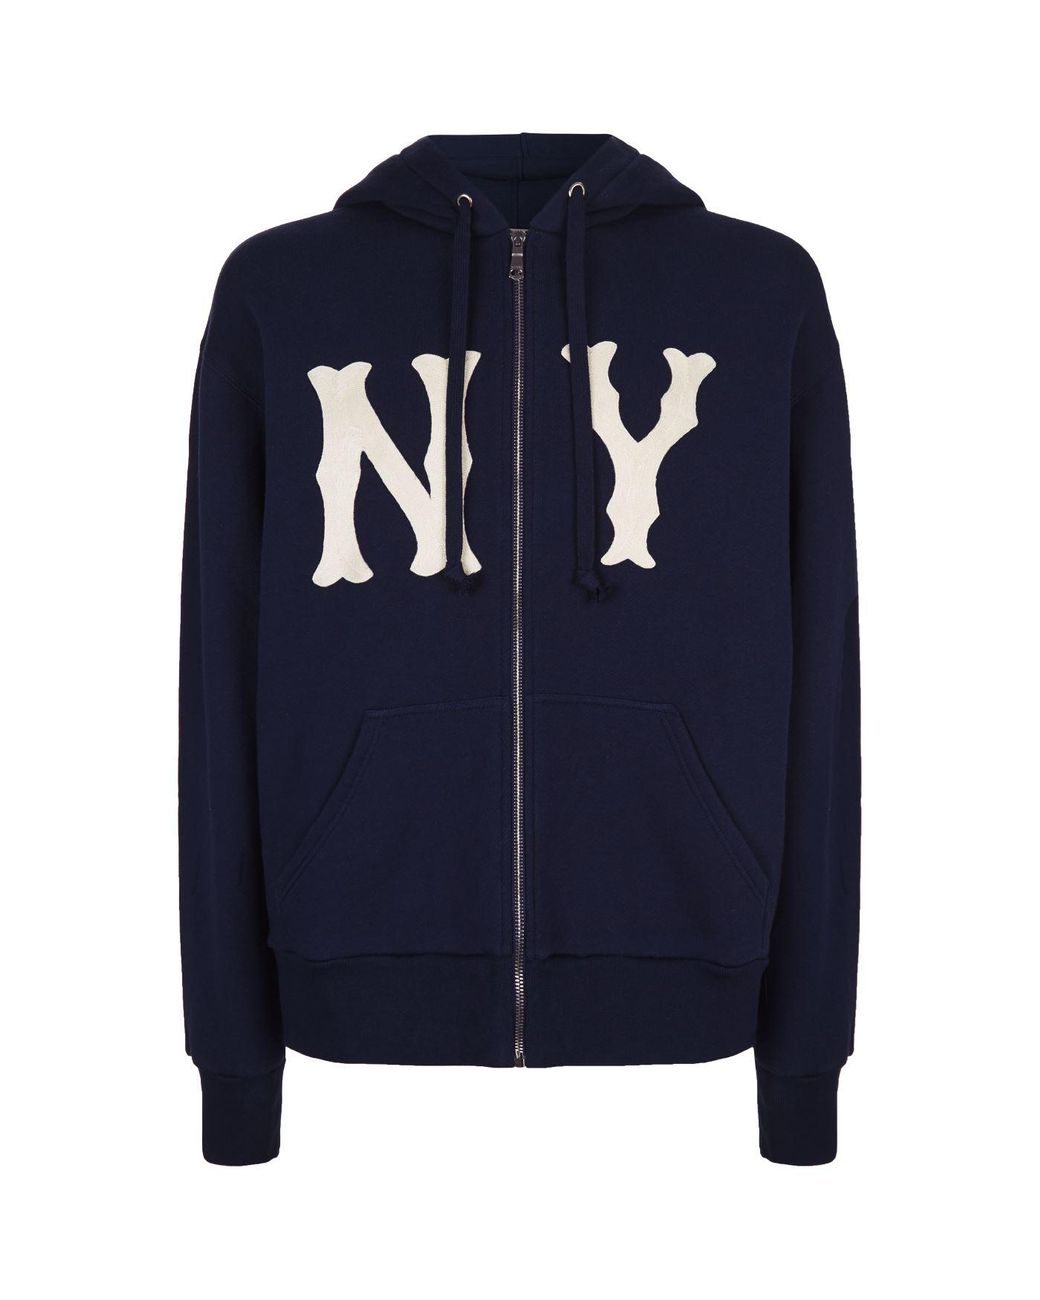 Gucci Sweatshirt With Ny Yankeestm Patch in Blue for Men | Lyst